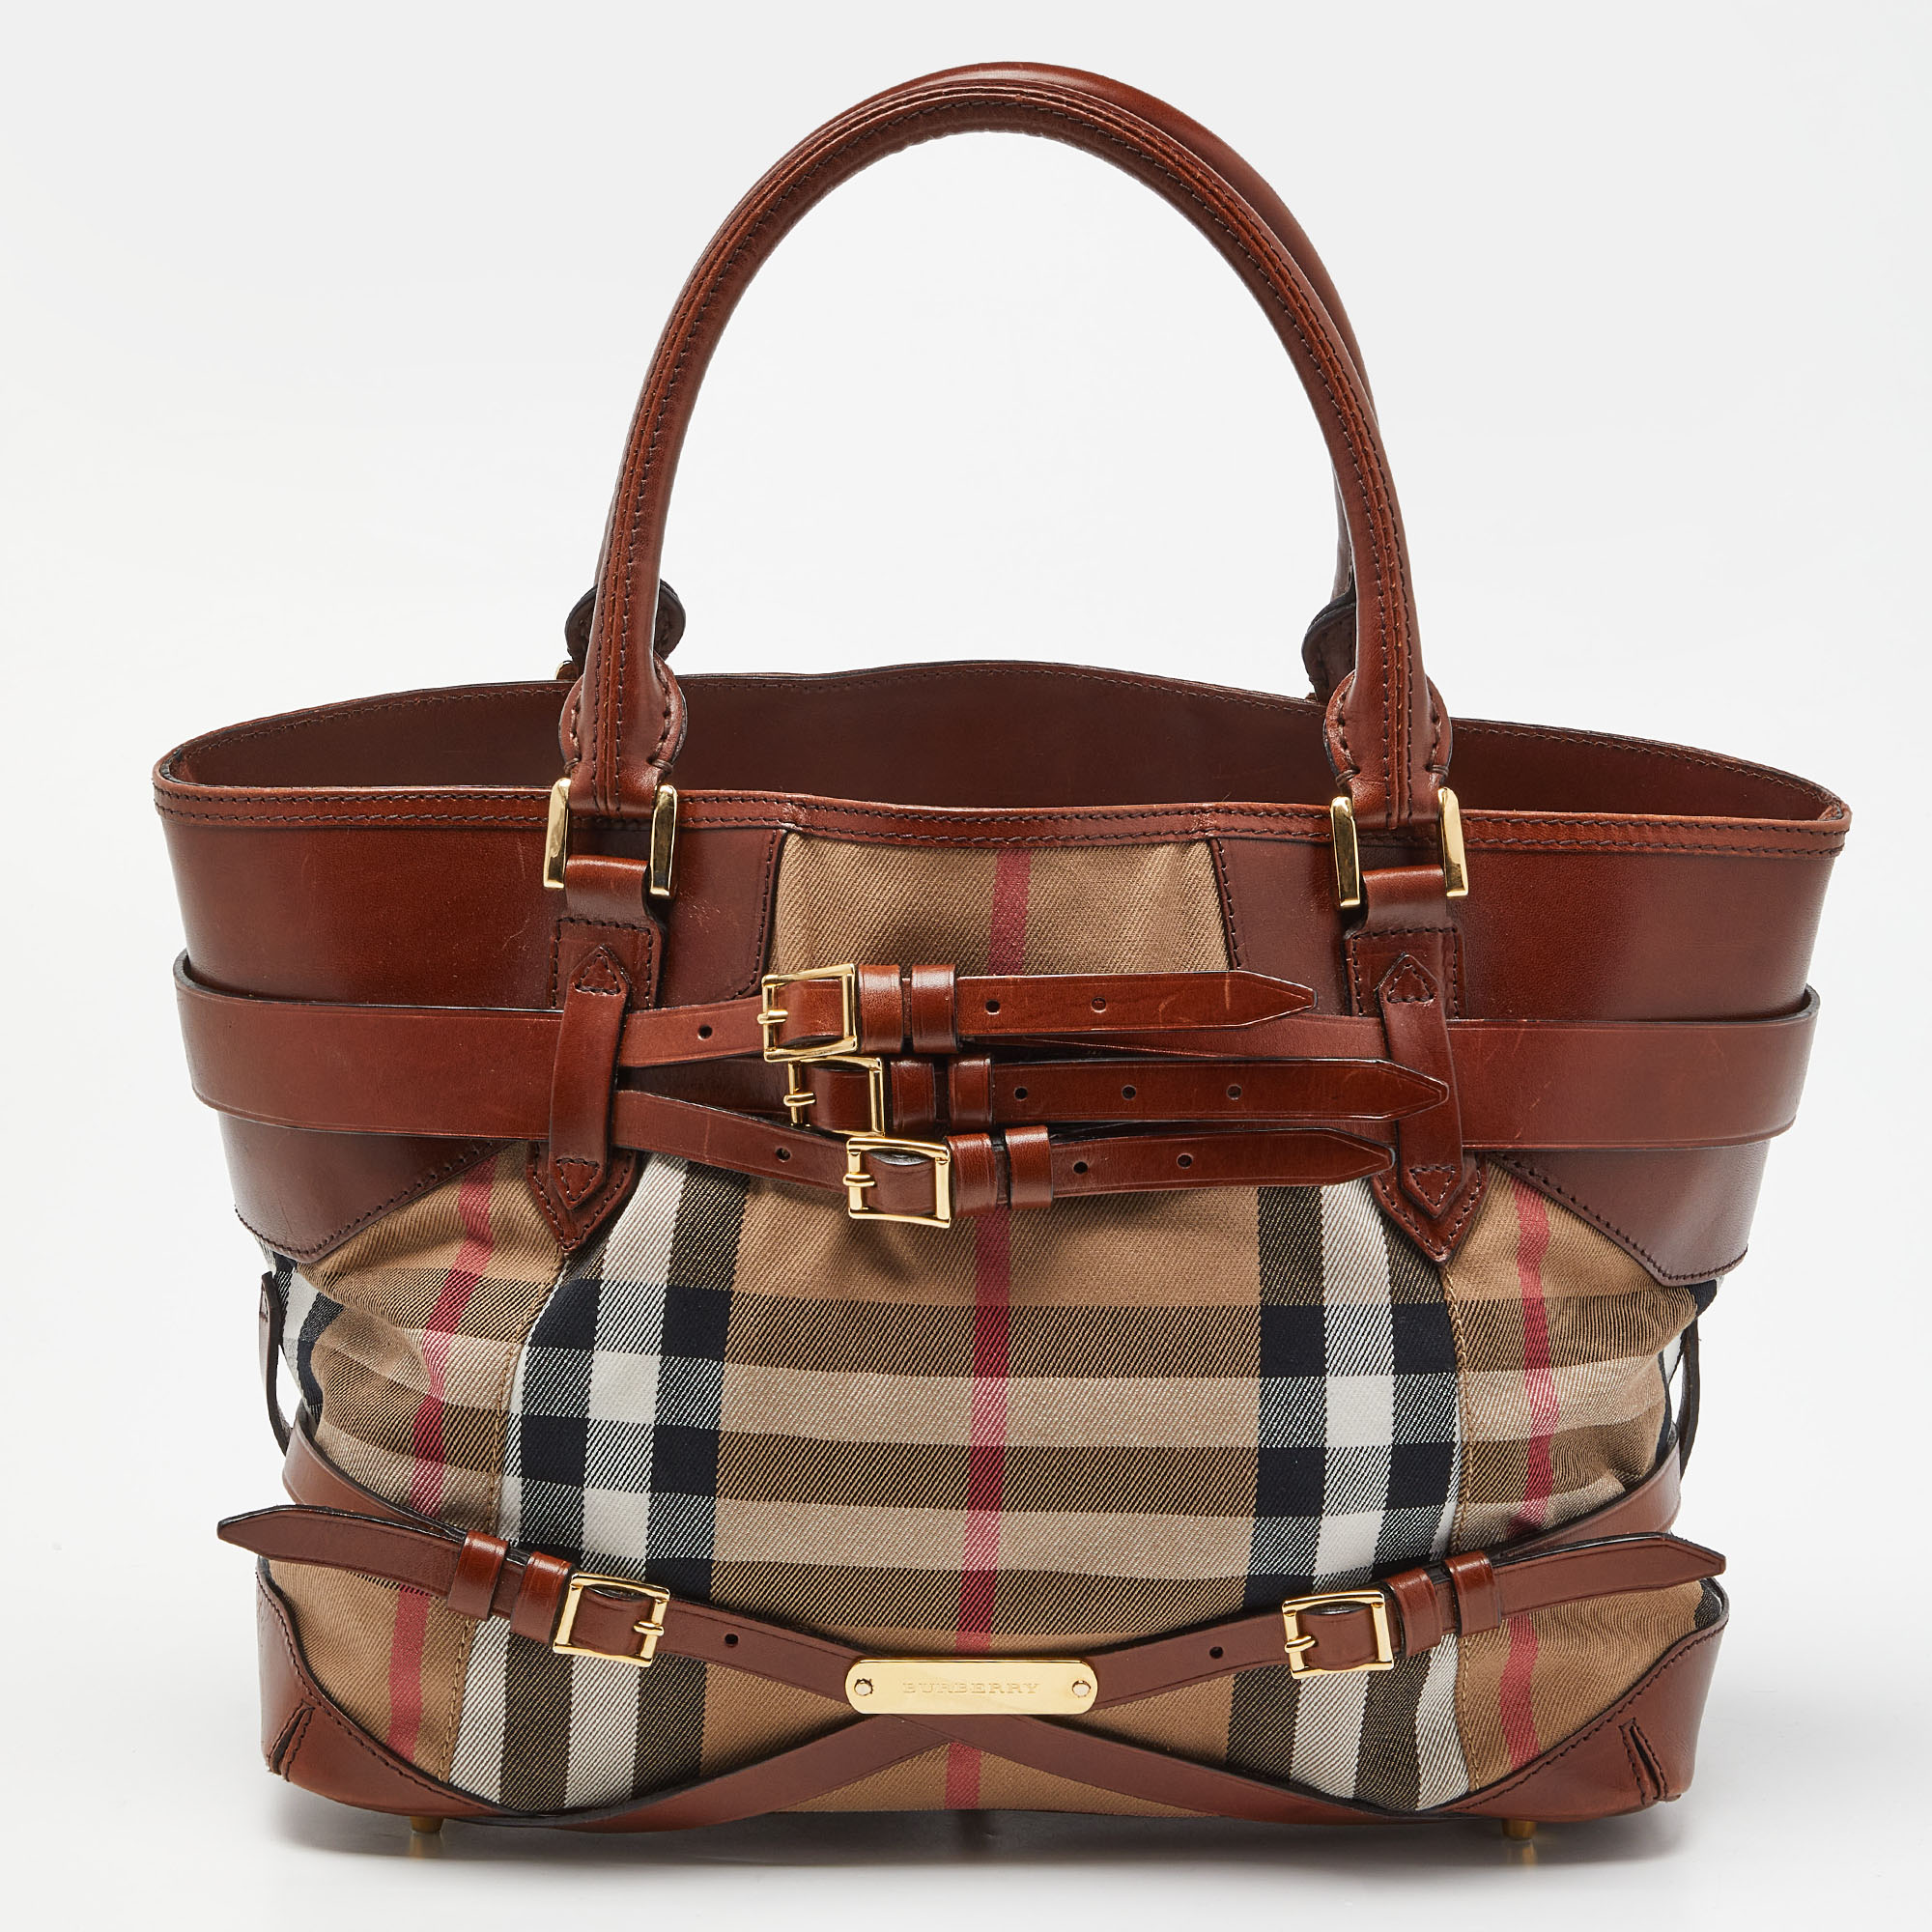 Walk out the door with the Burberry tote on your arm. Fashioned in House Check fabric and leather the tote has two short handles and a spacious interior.